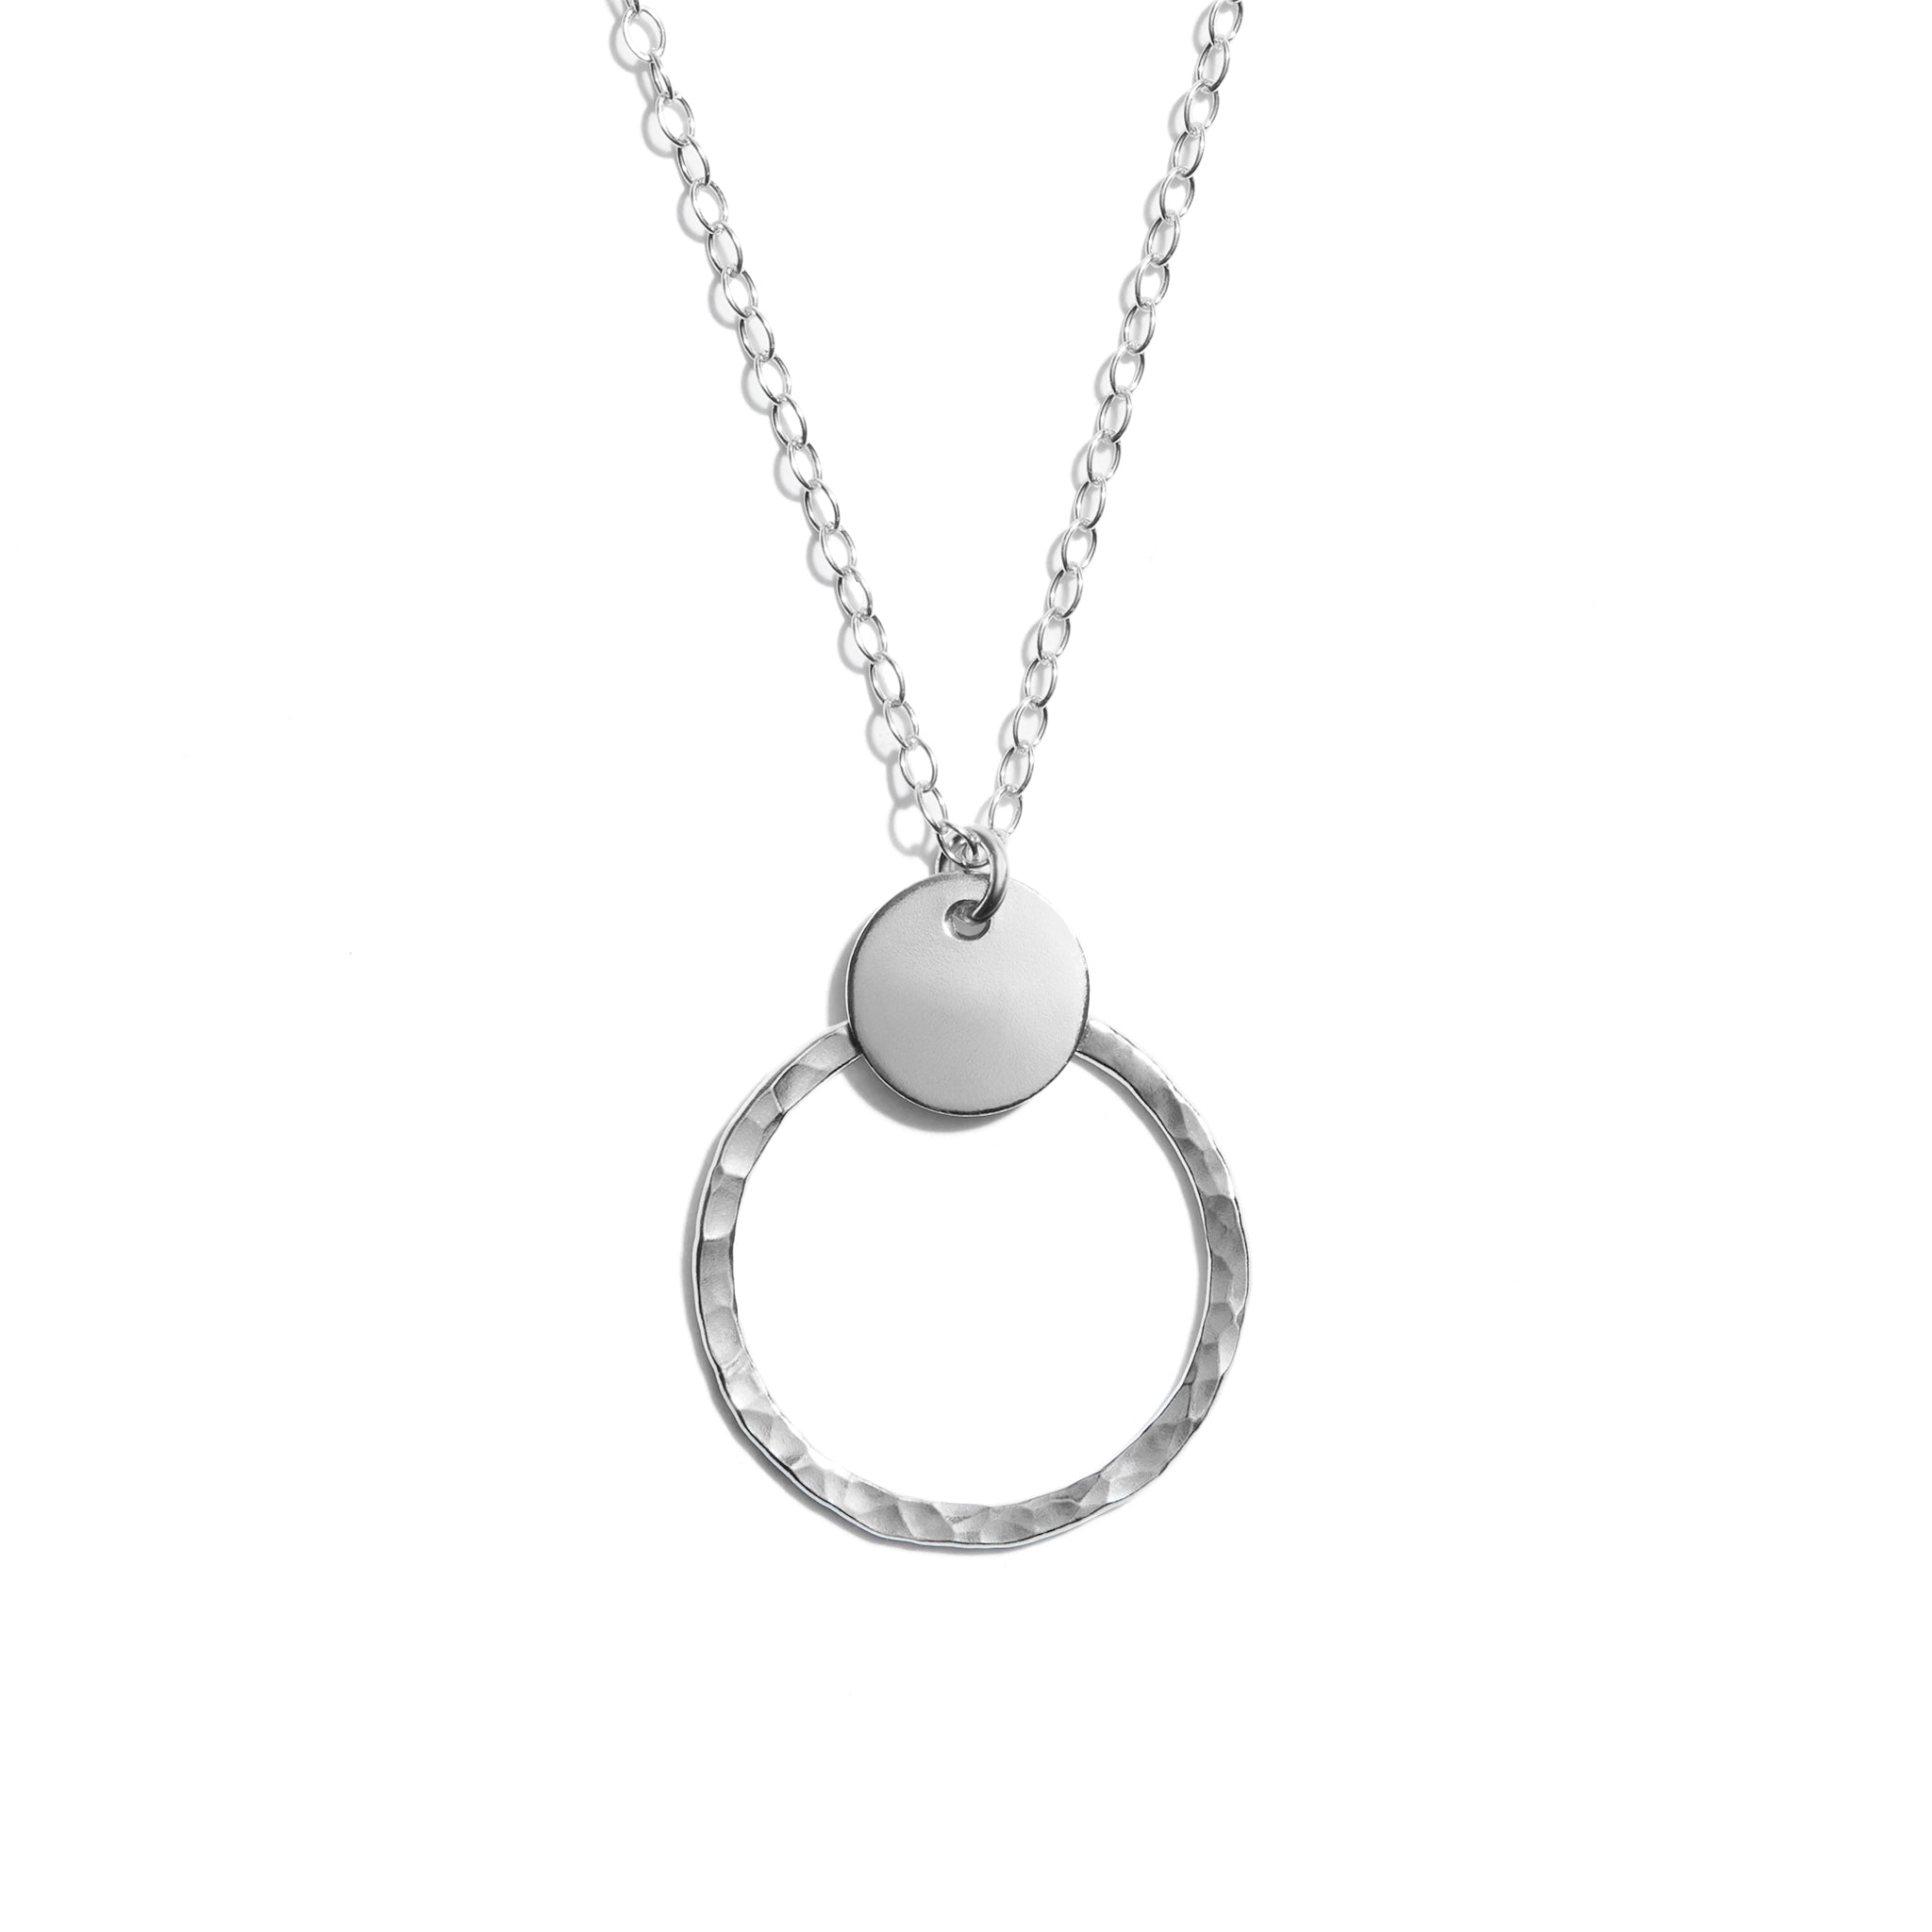 Close-up photo of a duo disk necklace crafted from sterling silver. Perfect for adding elegance to any outfit.